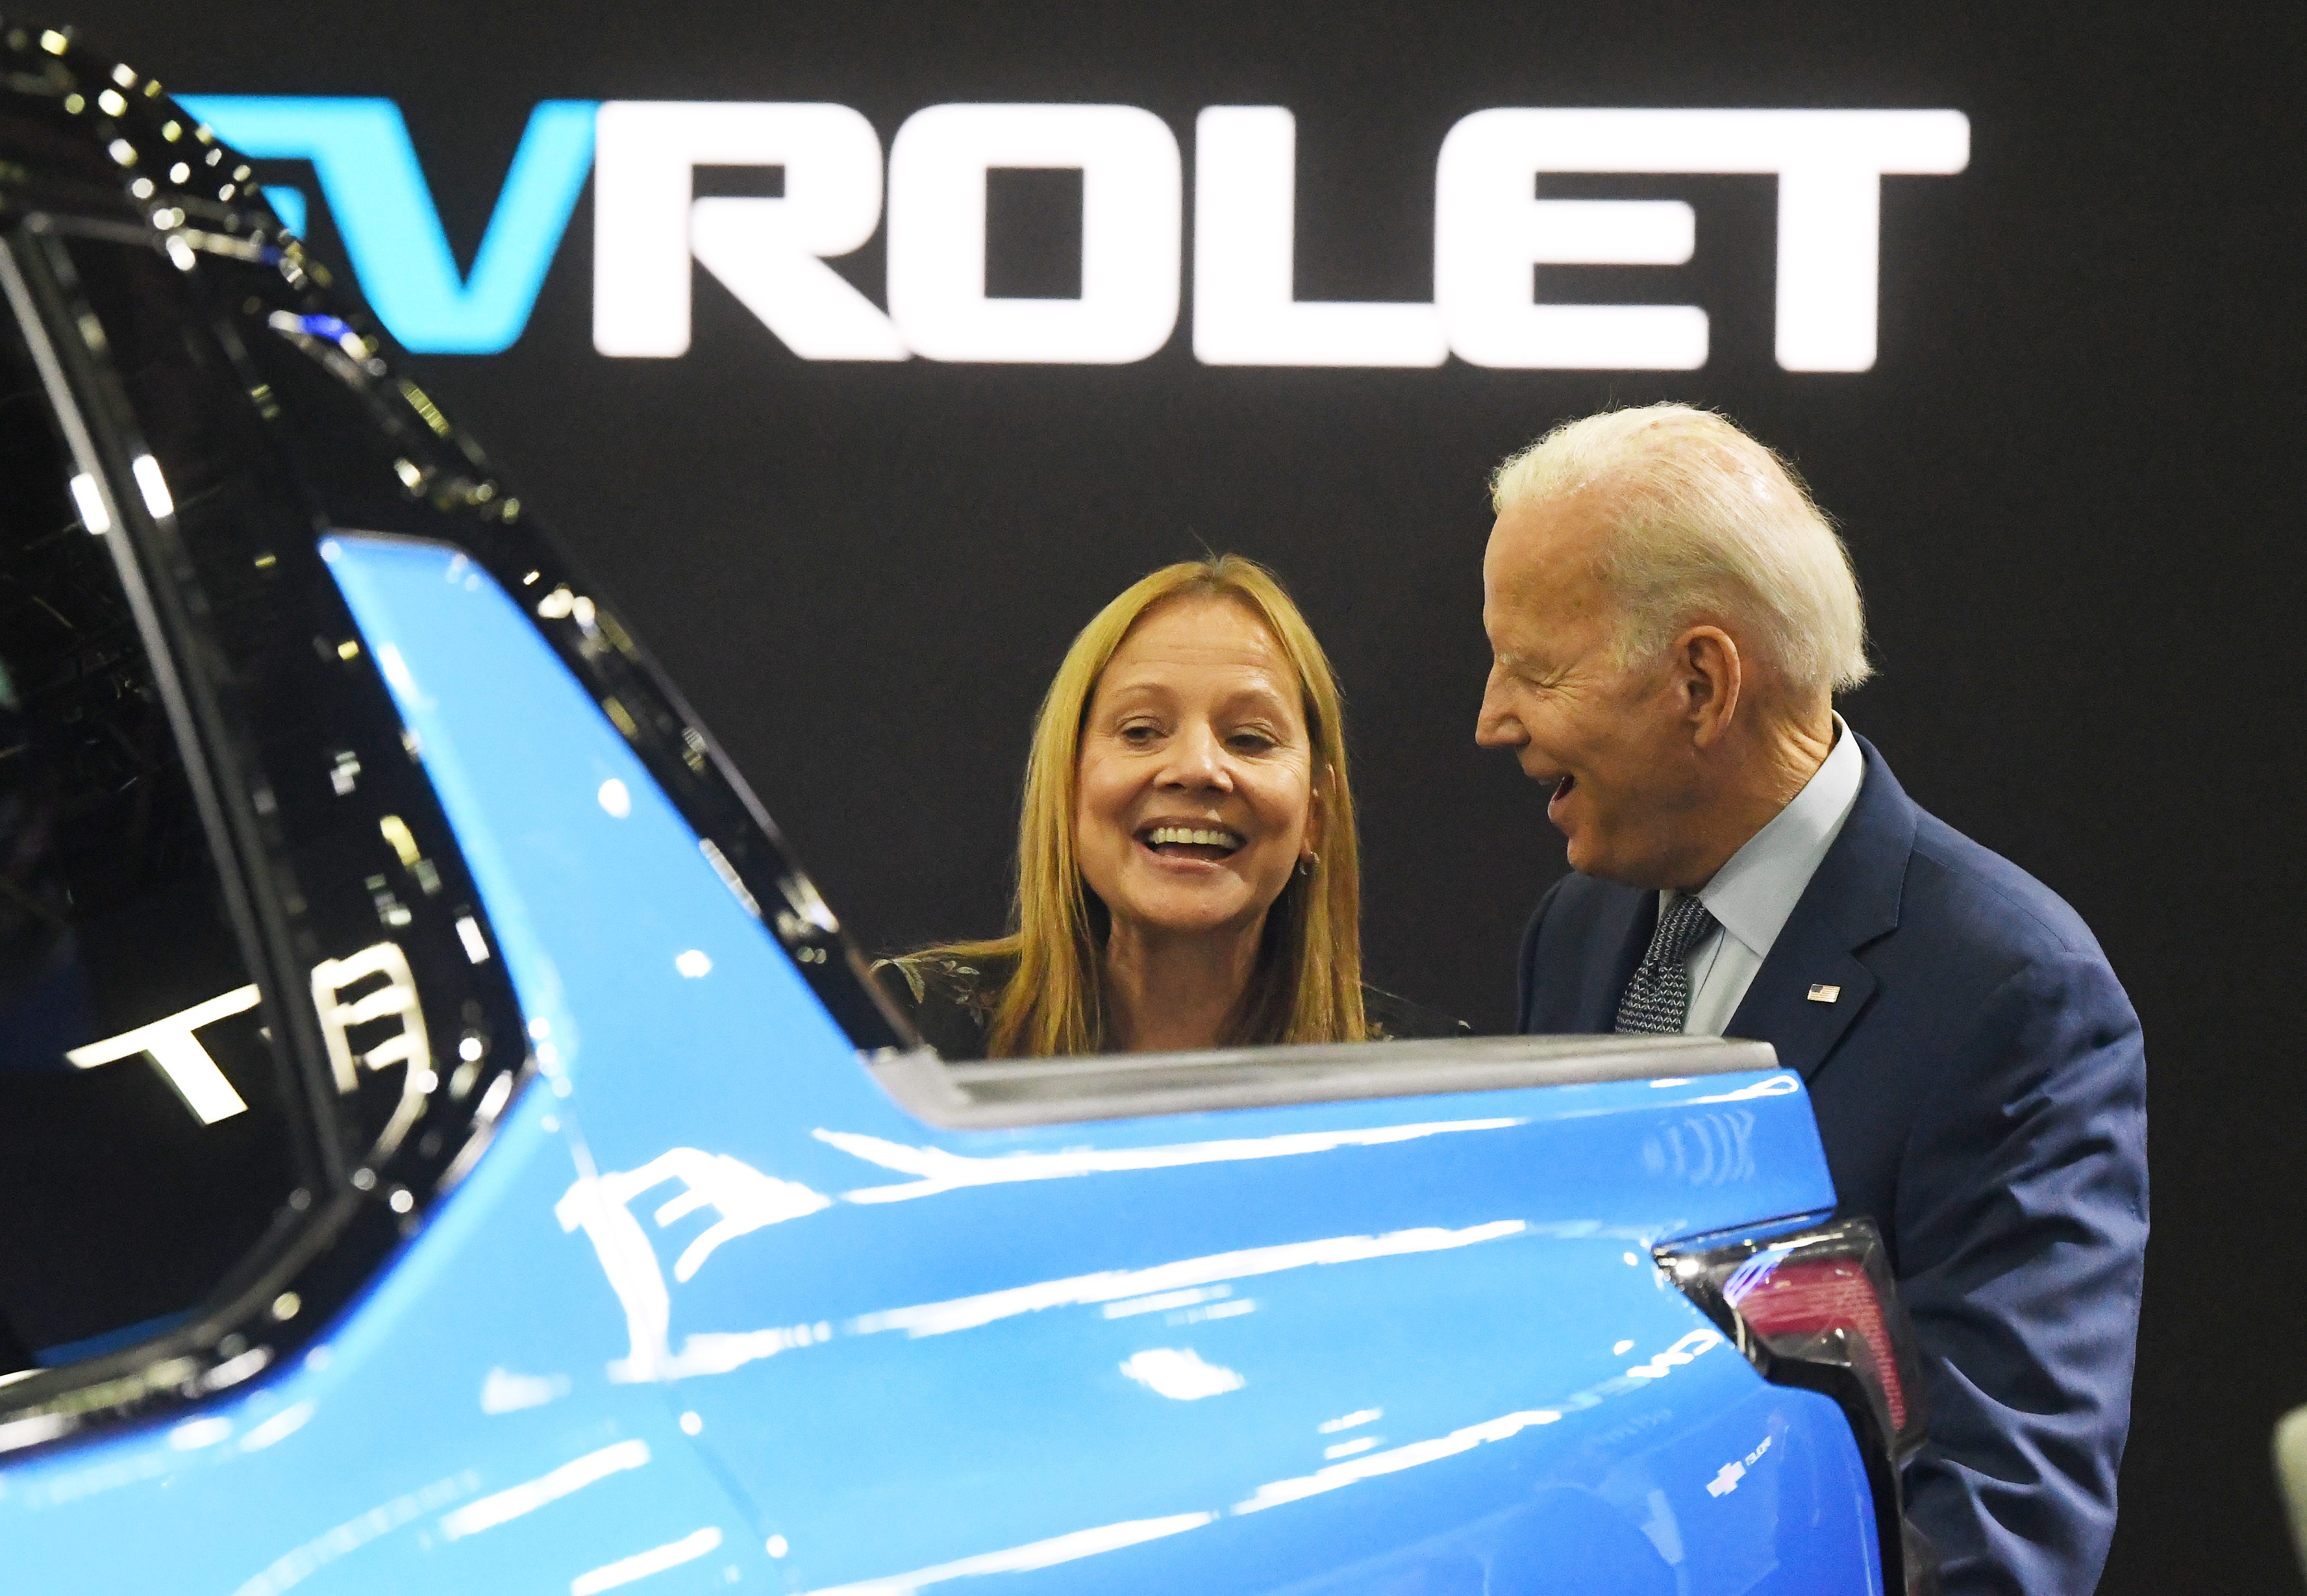 GGeneral Motors chair and chief executive officer Mary Barra shows President Joe Biden a Silverado EV at the GM display during a tour of the 2022 North American International Auto Show in Detroit, Michigan on September 14, 2022.